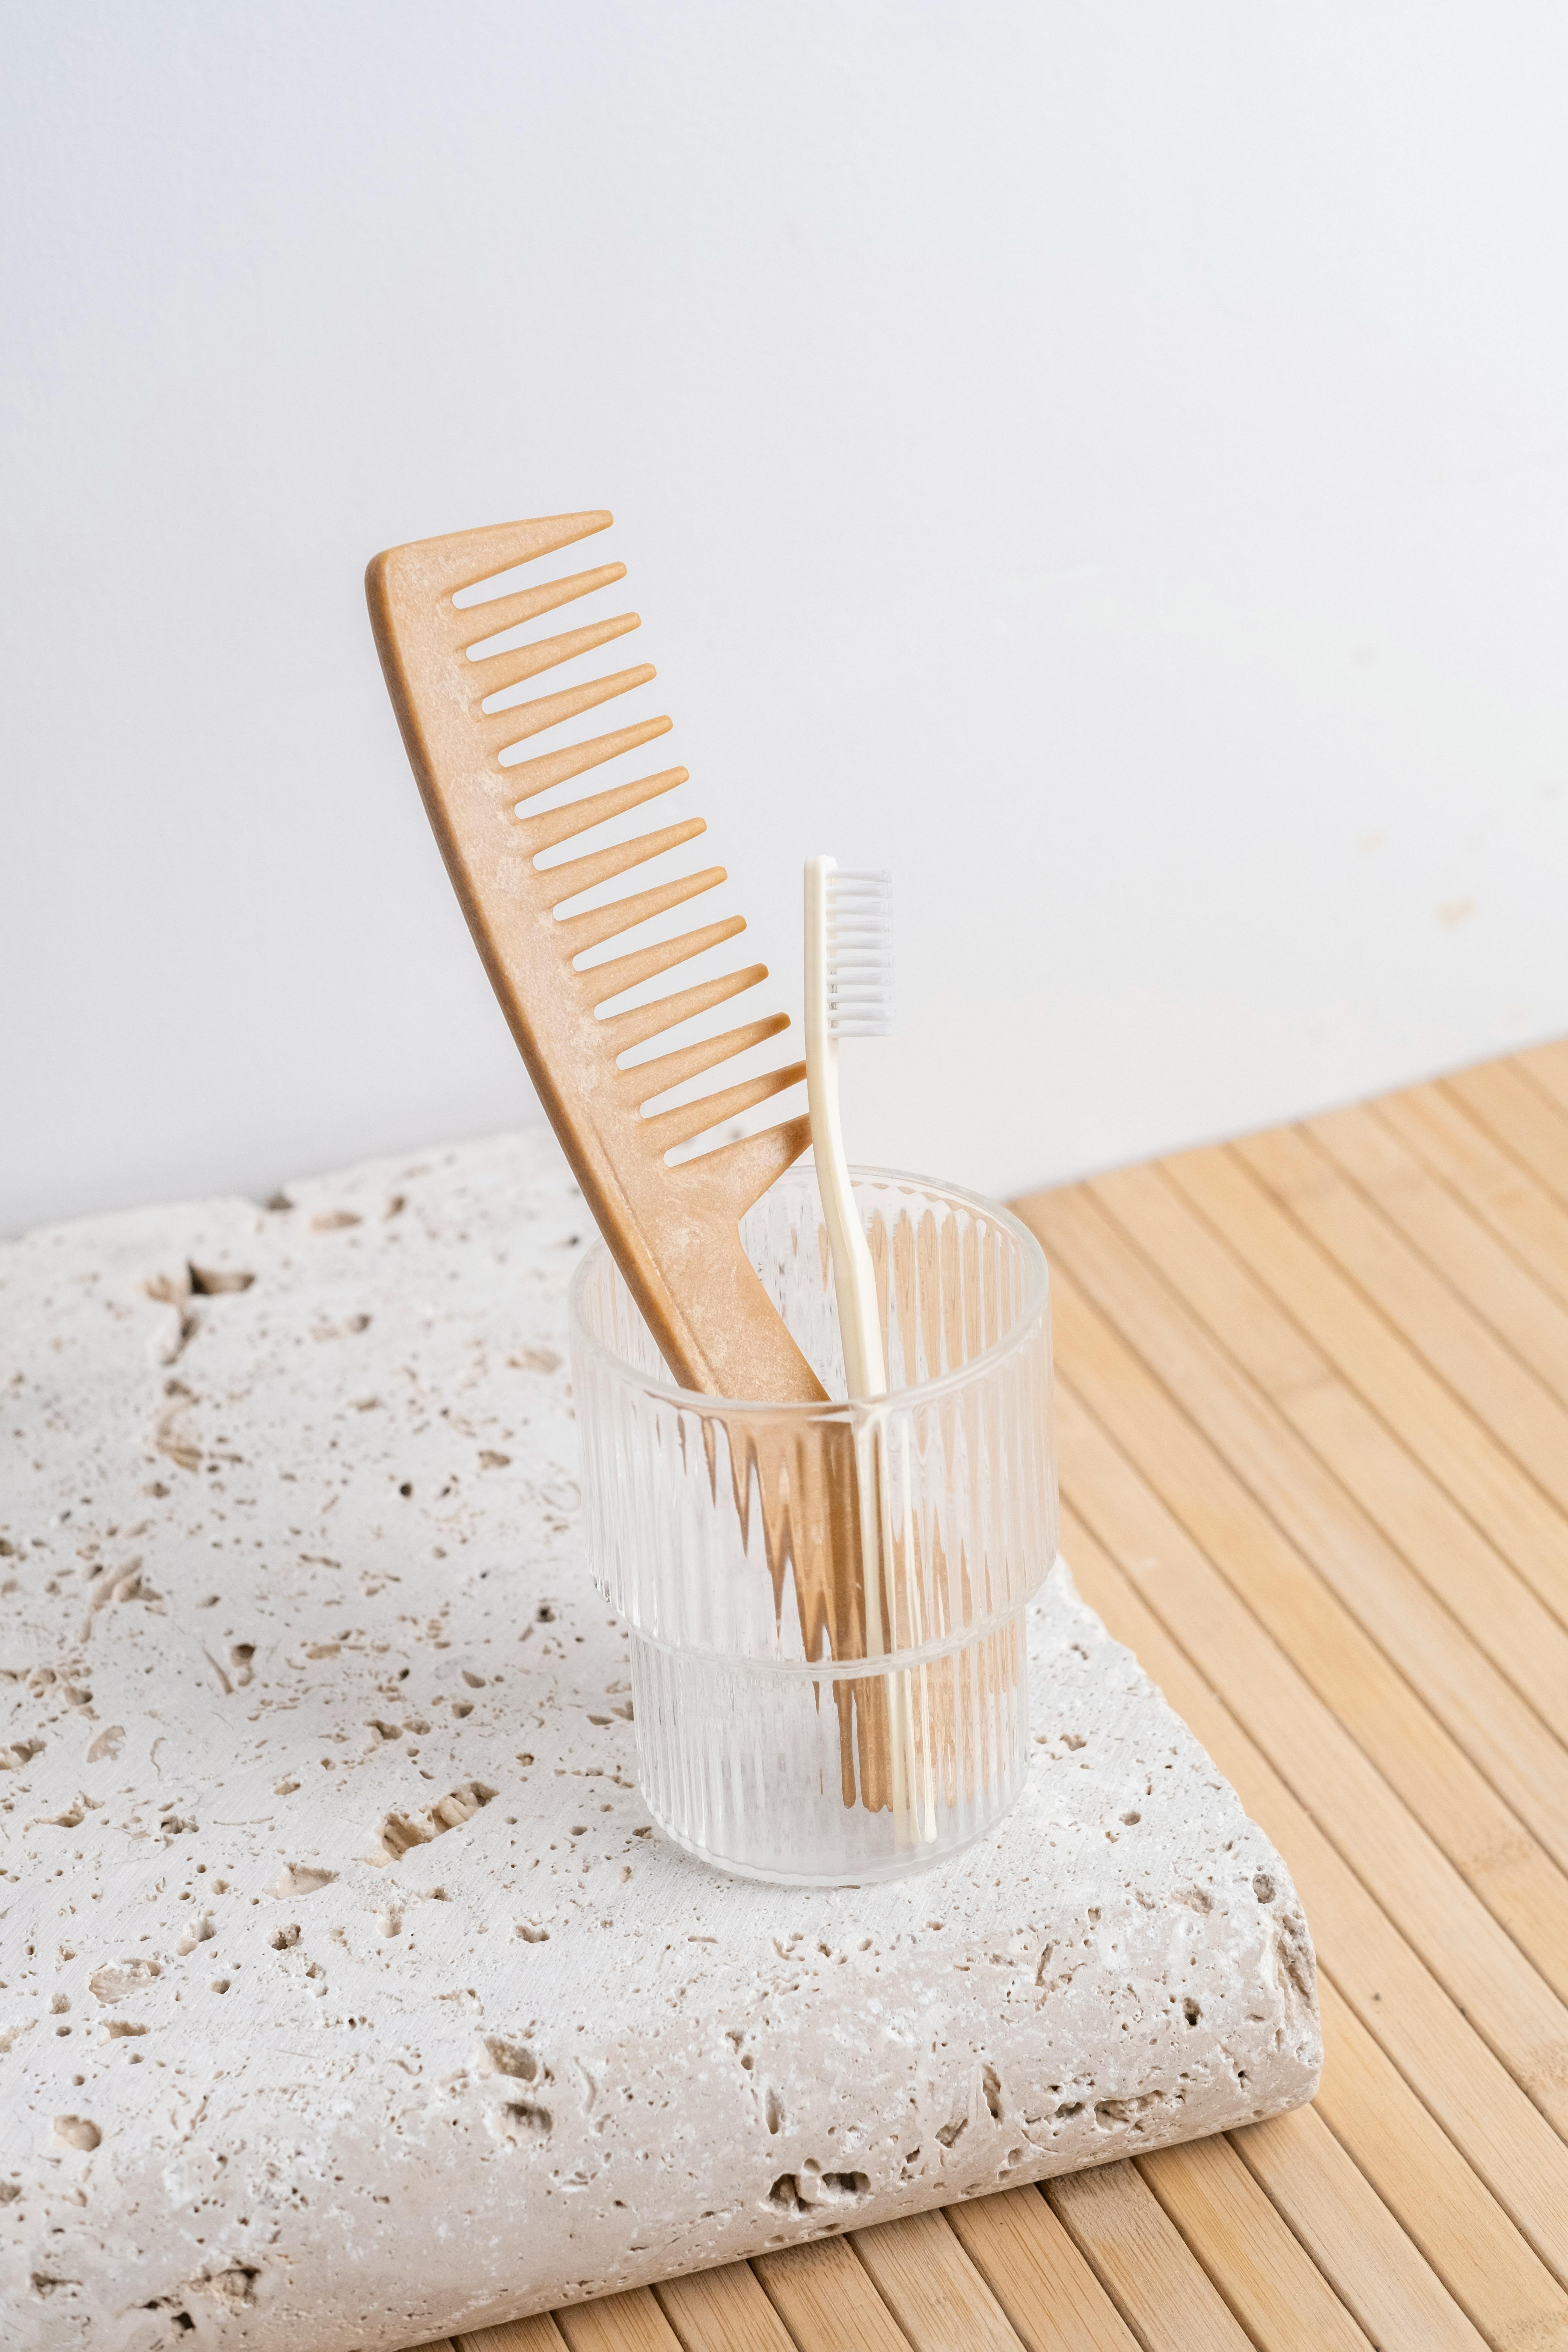 A comb and a toothbrush | Source: Pexels